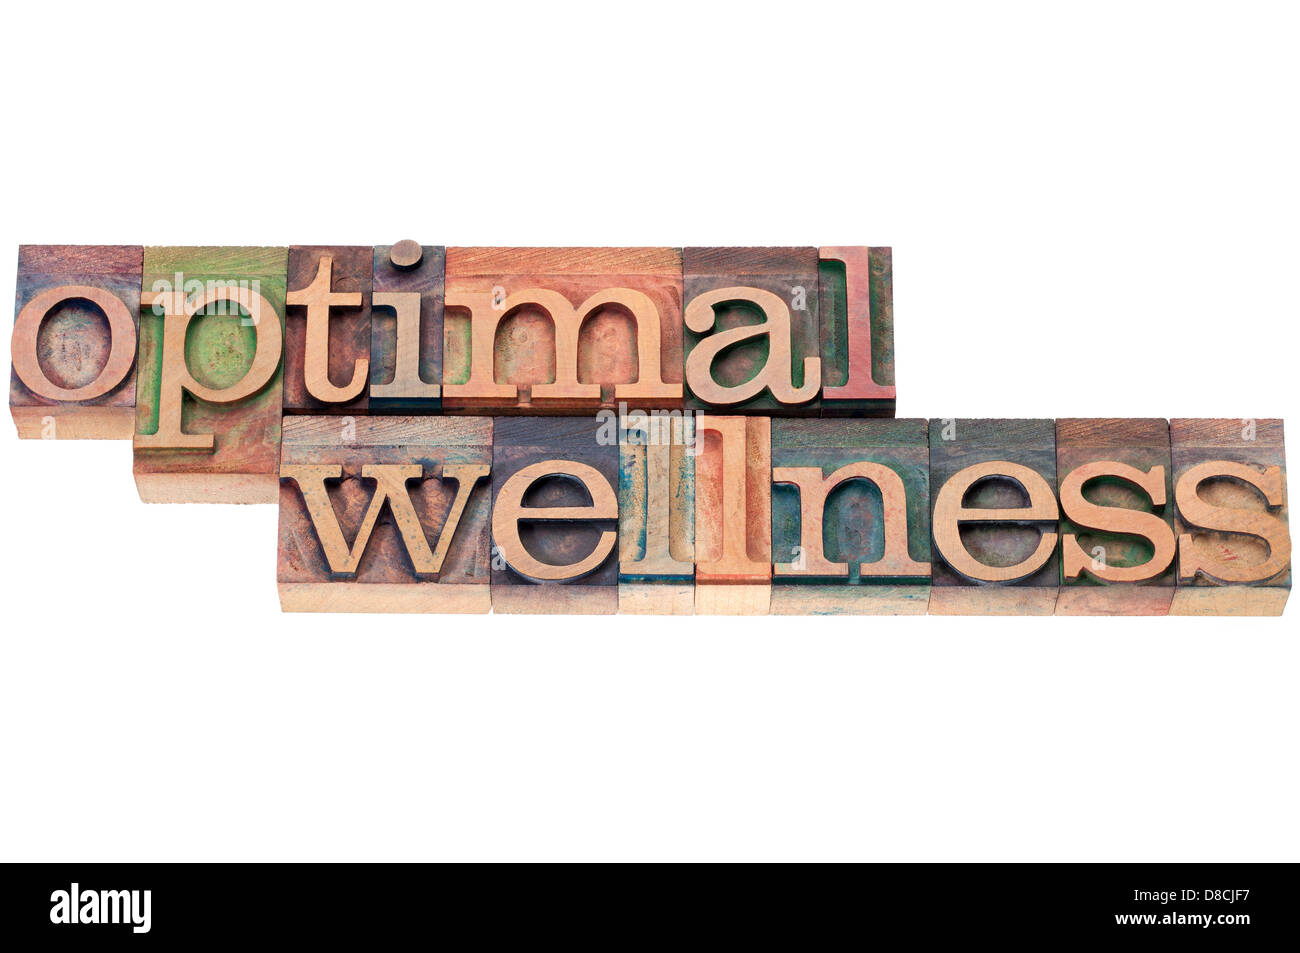 optimal wellness - health concept - isolated text in letterpress wood type printing blocks Stock Photo